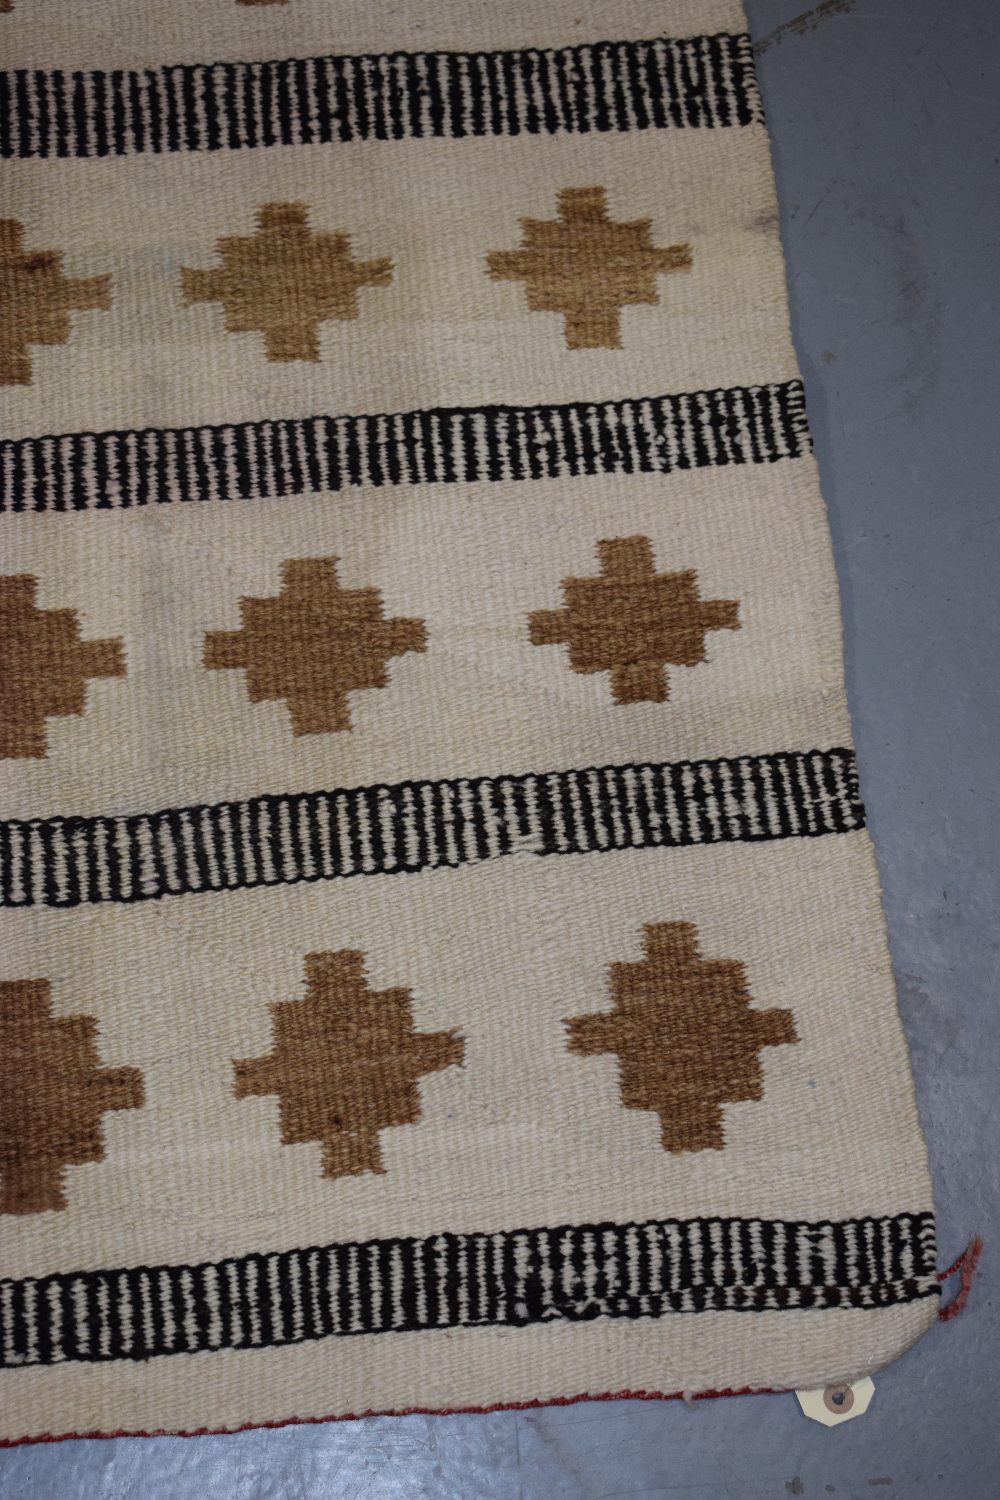 South west American small flatweave, Hopi or Navajo, first half 20th century, 3ft. 8in. X 2ft. - Image 2 of 6